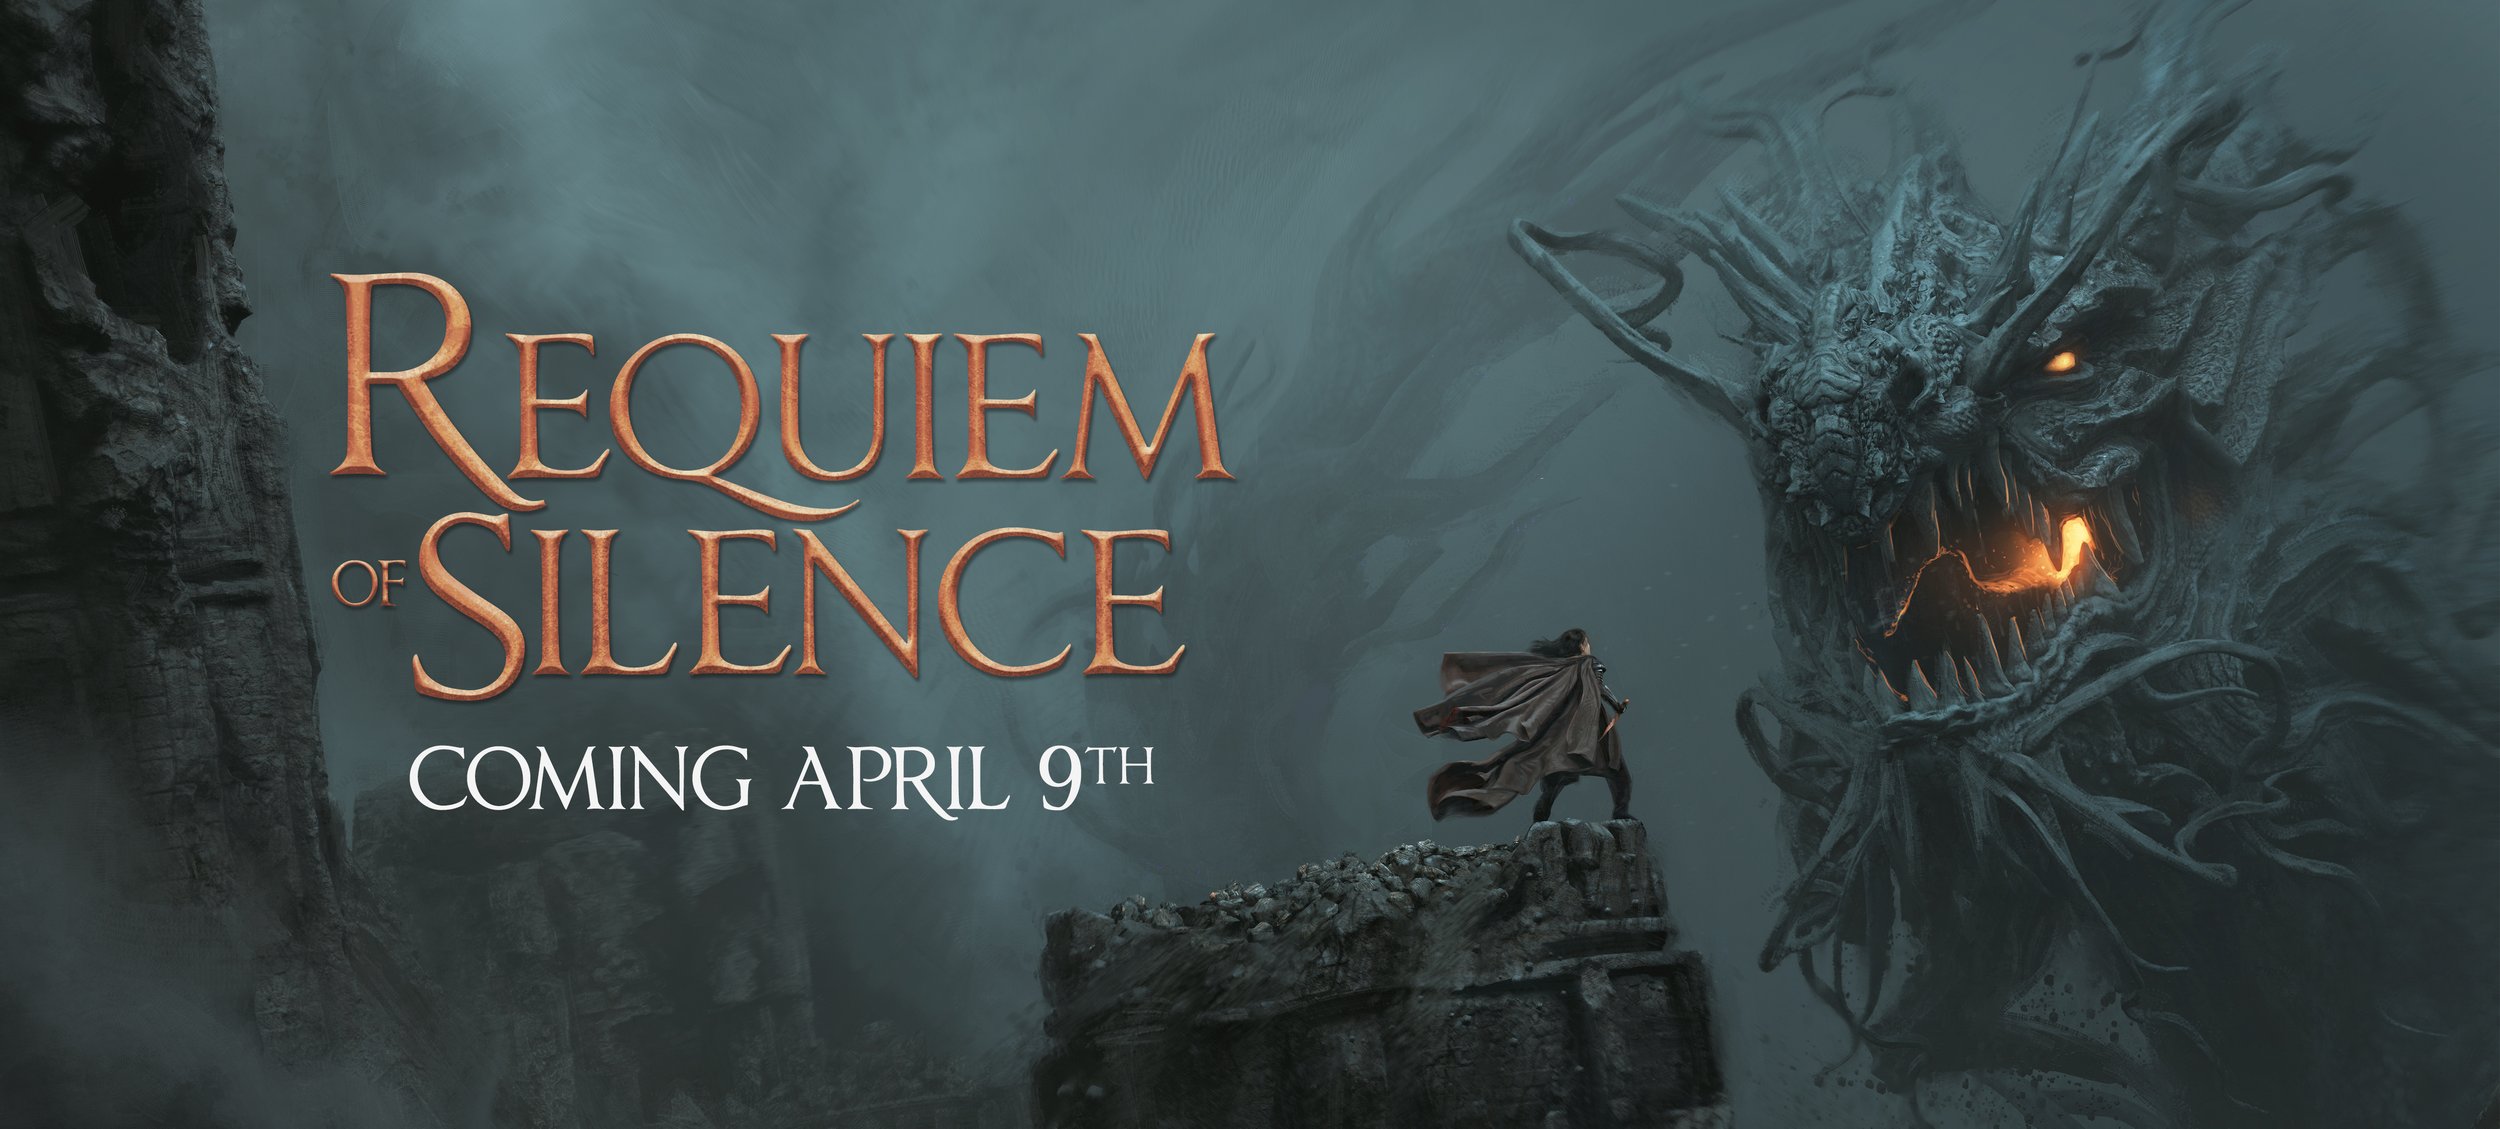 Coming soon: Requiem of Silence, the conclusion to The Famine Cycle trilogy  — J.D.L. Rosell